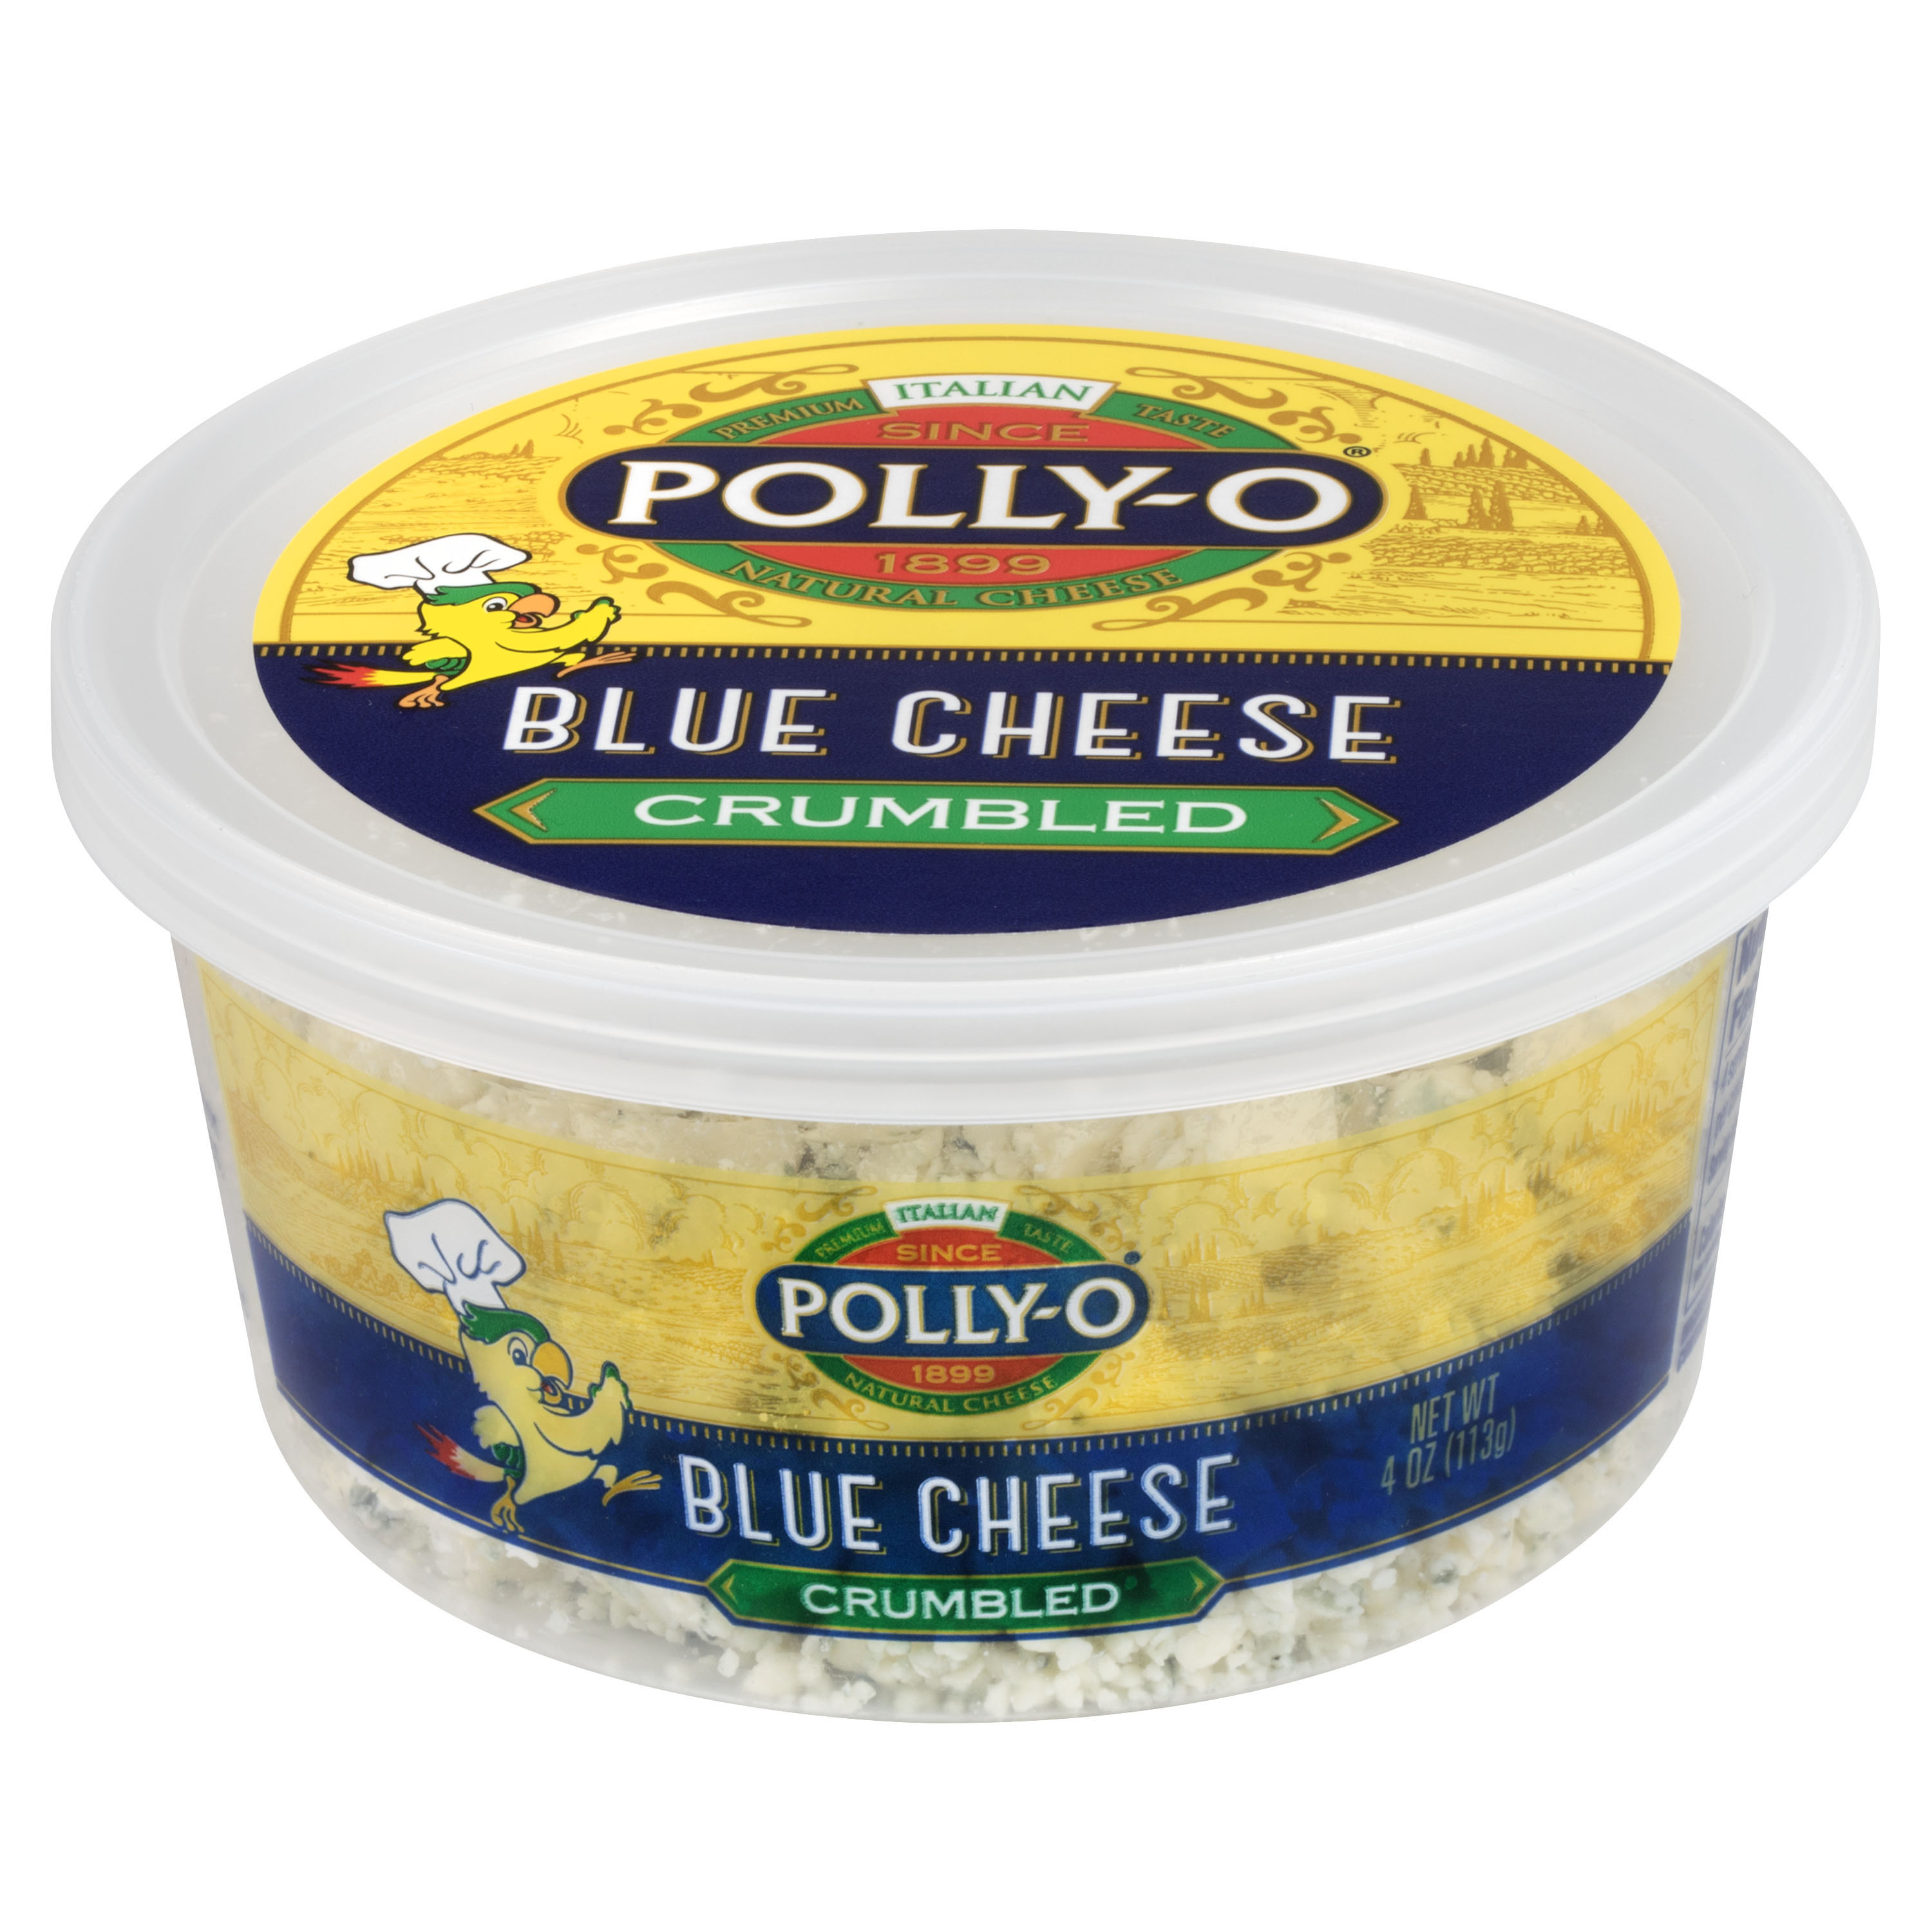 Blue Cheese, 4 oz. Cup